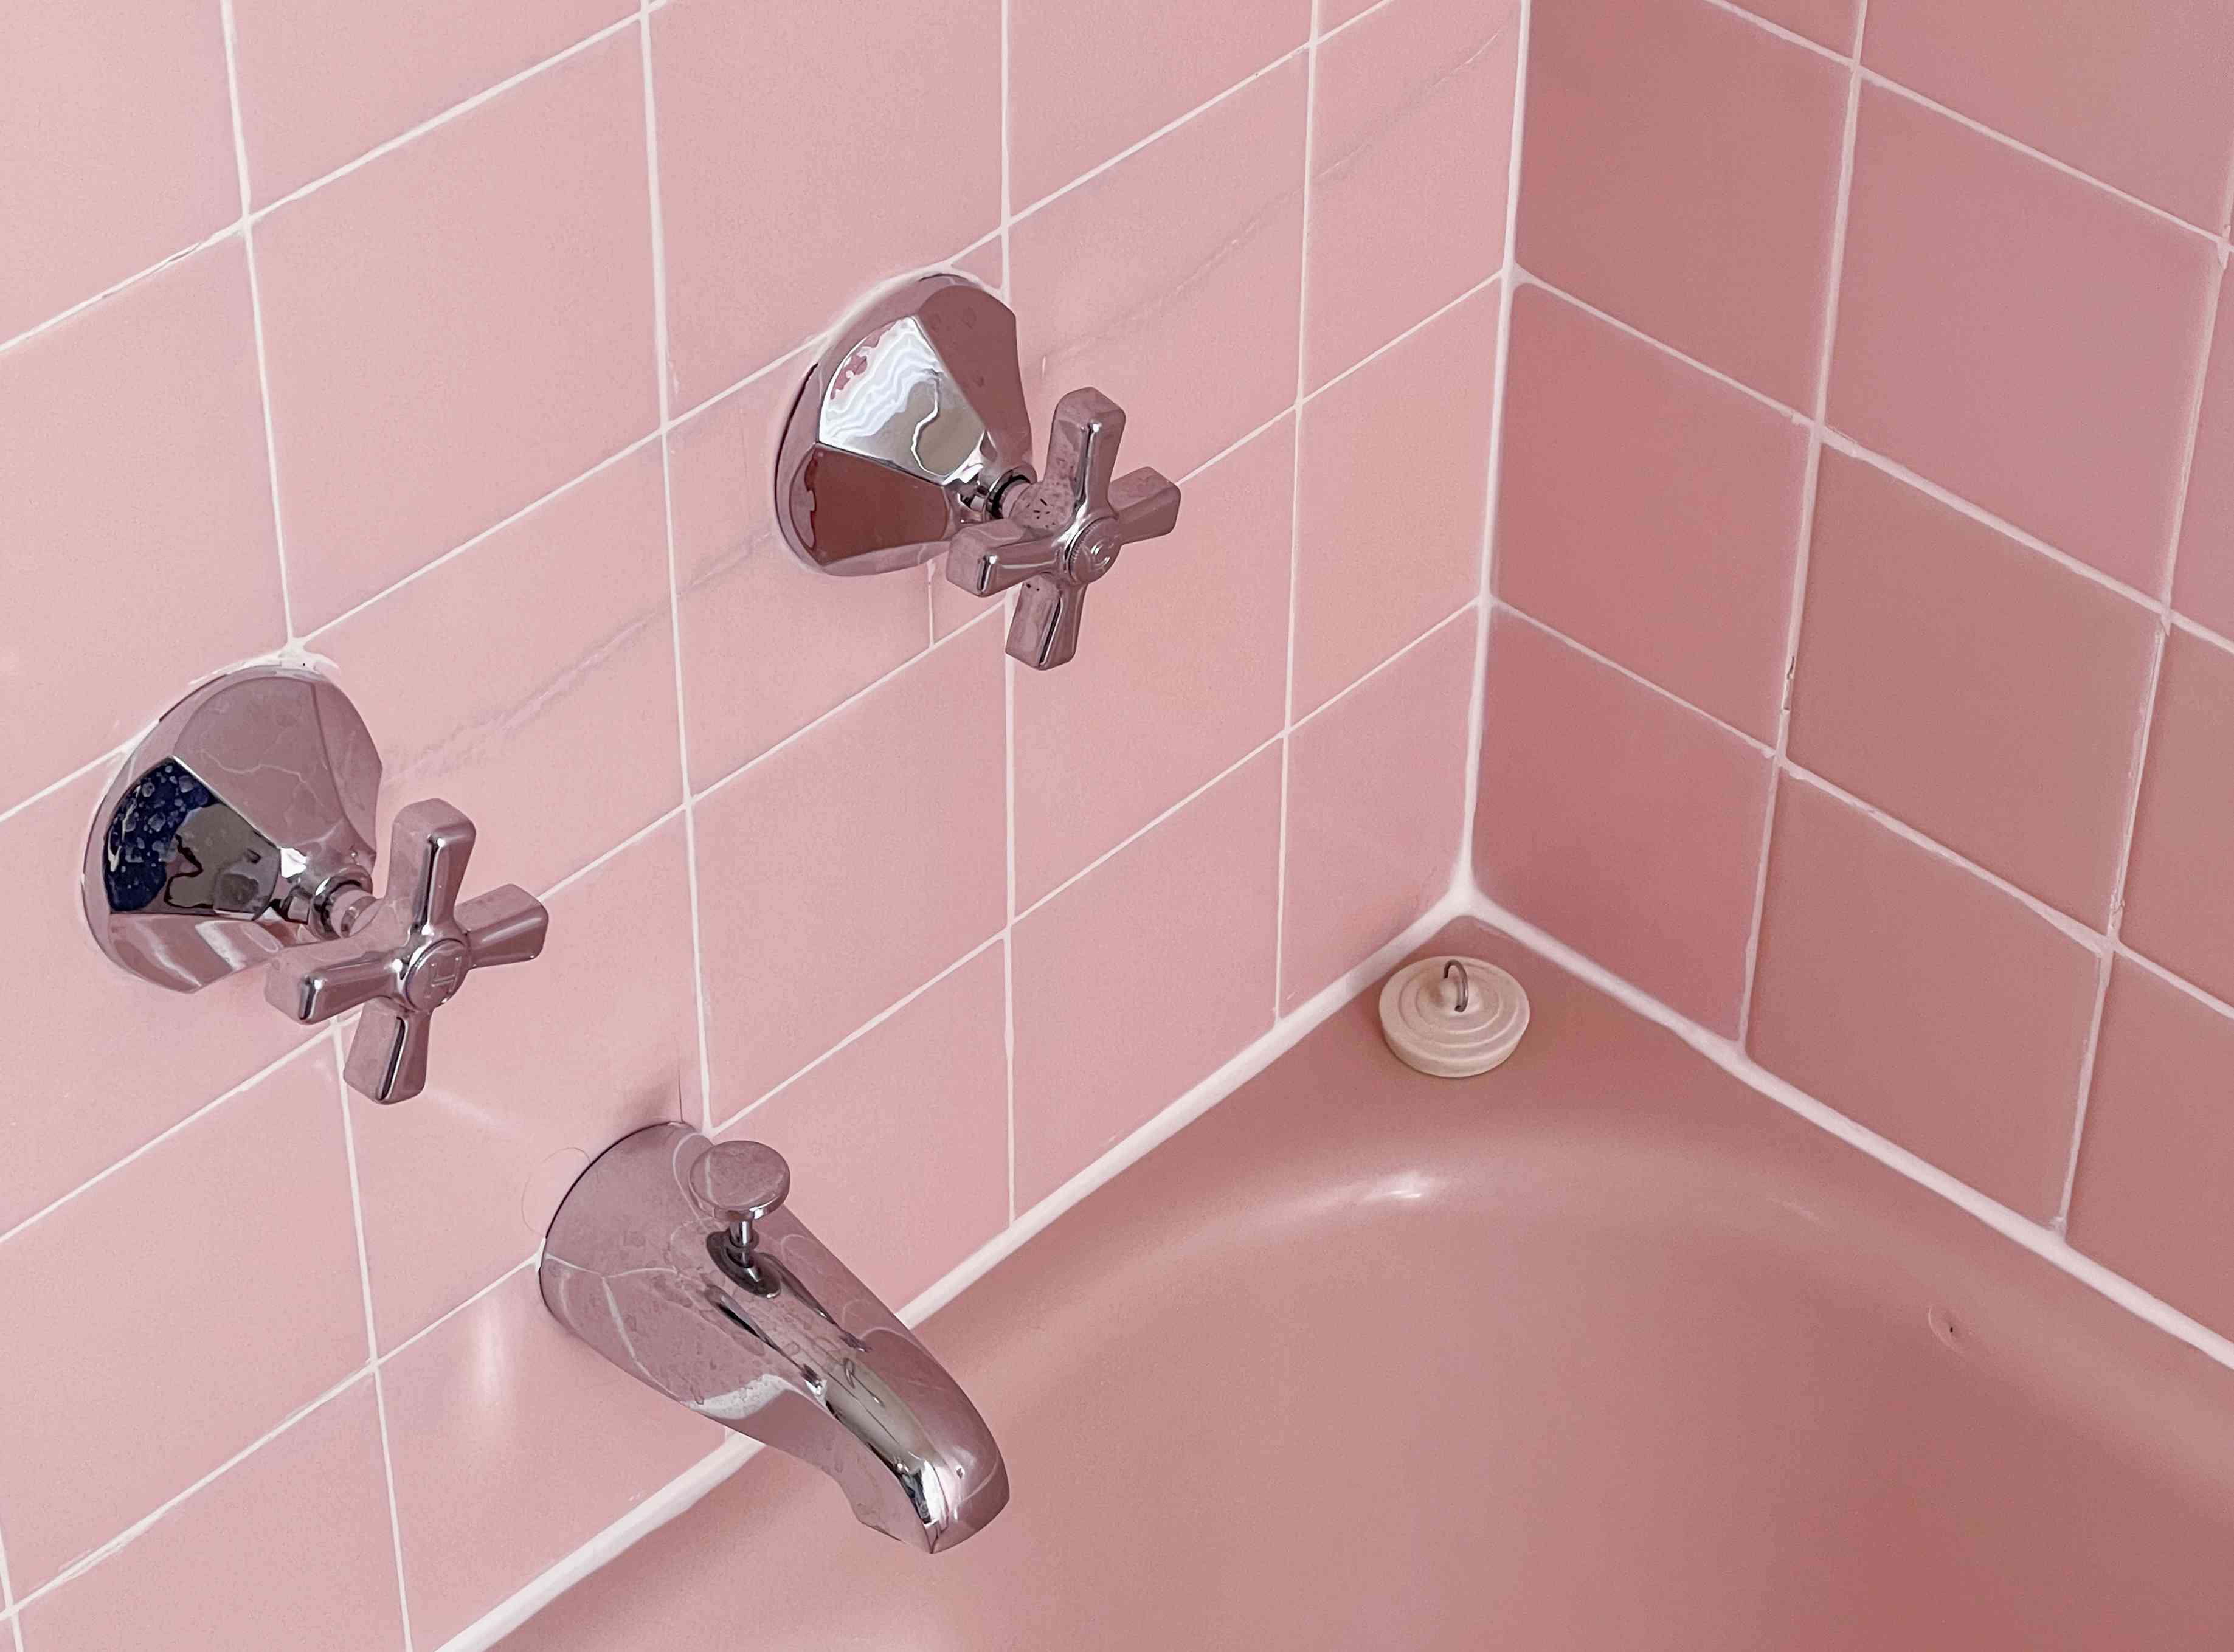 18 Things That Make Your Bathroom Look Dated